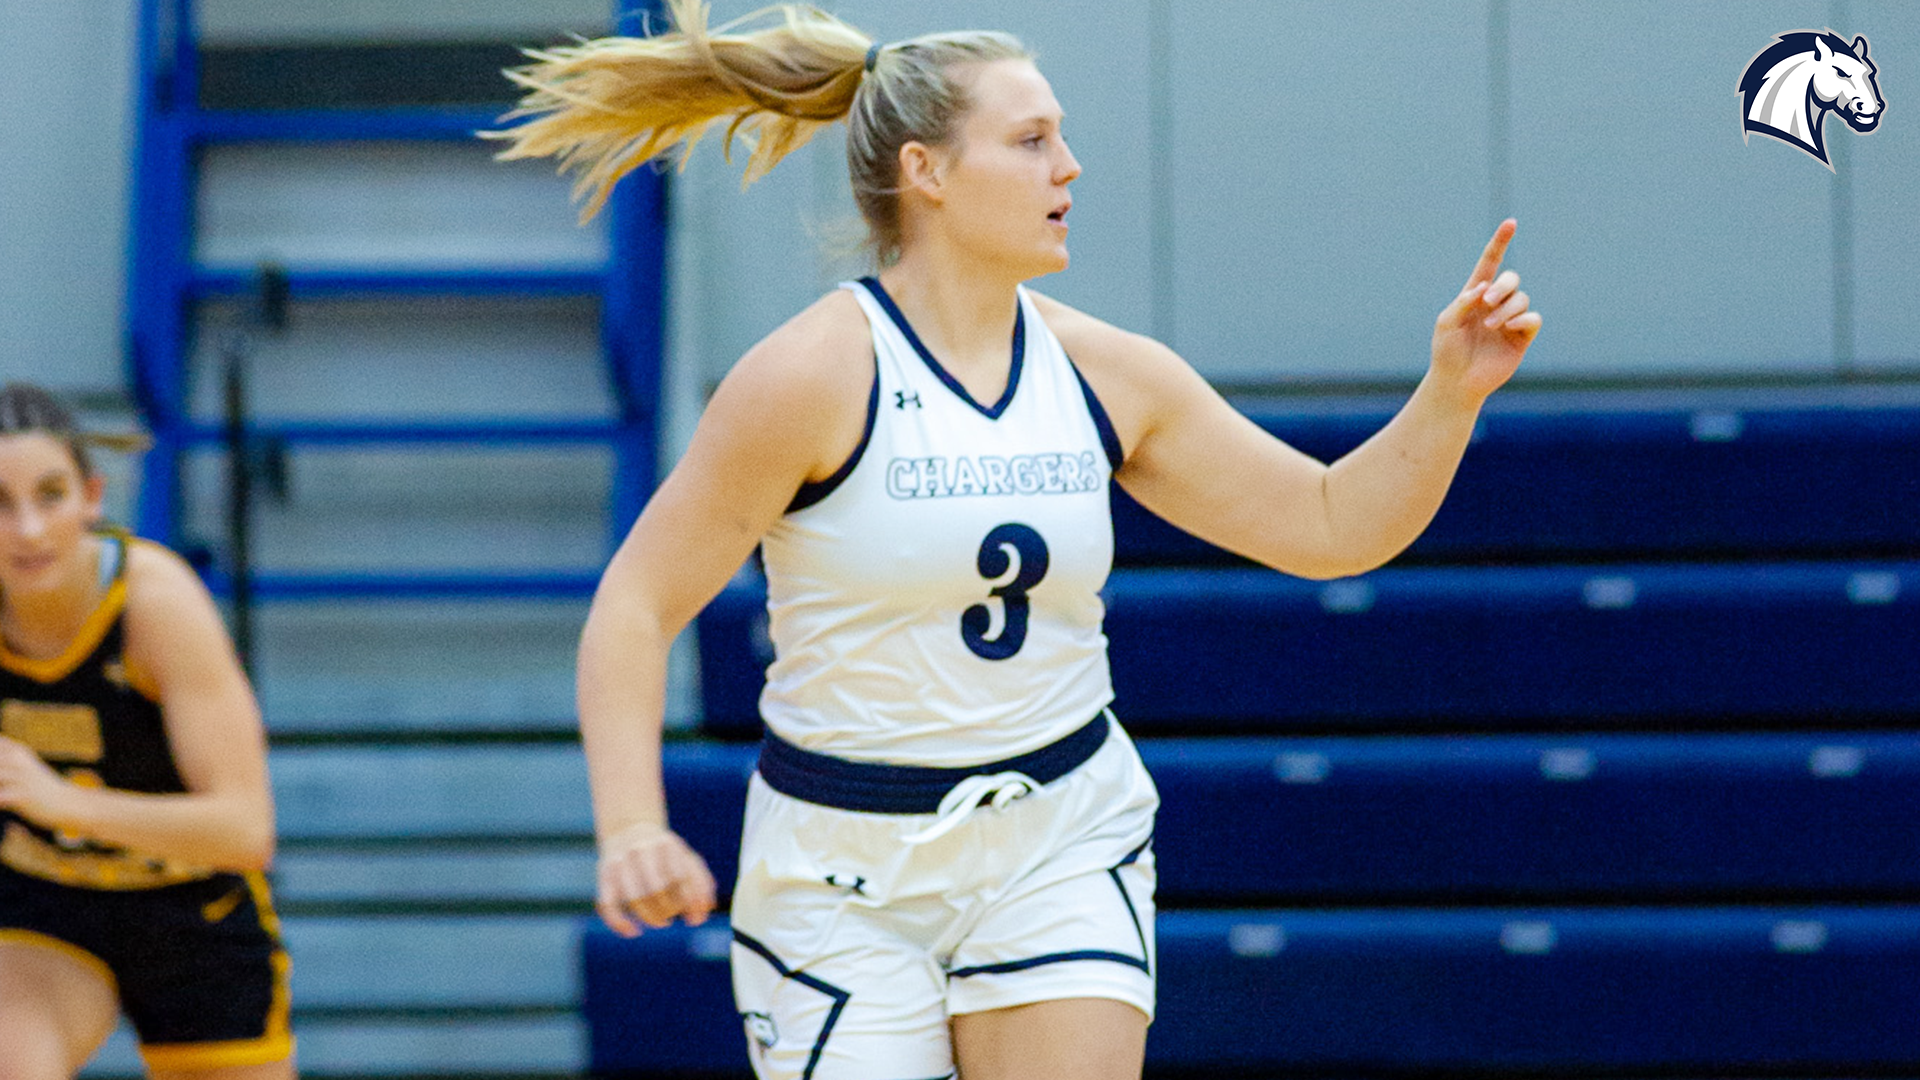 Chargers use net-scorching shooting performance to beat Findlay on the road, 89-73